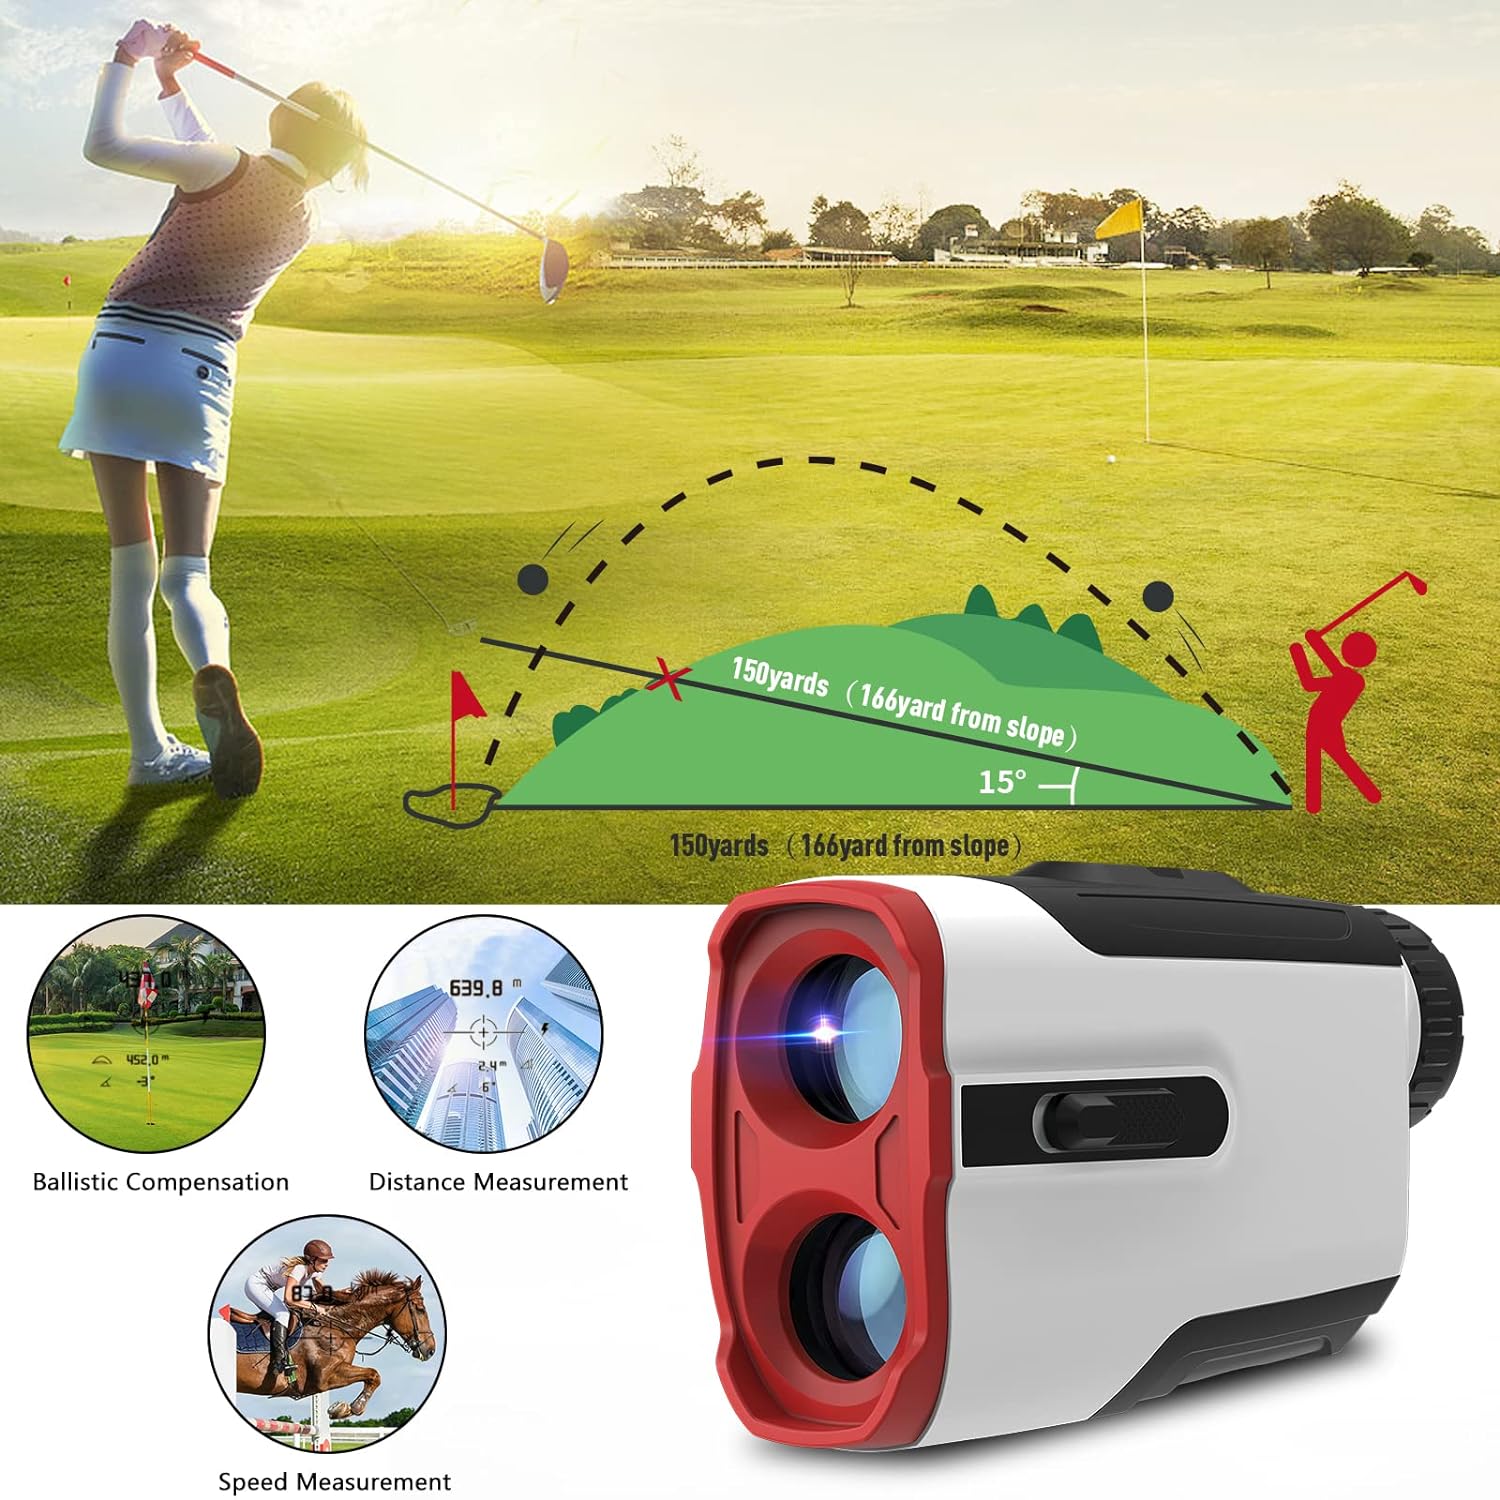 Segmart Golf Rangefinder 7X Magnification Clear View Laser Range Finder, Slope Function, 900 Yards Distance Measuring with High-Precision Flag Pole Locking, Rechargeable Battery and Continuous Scan